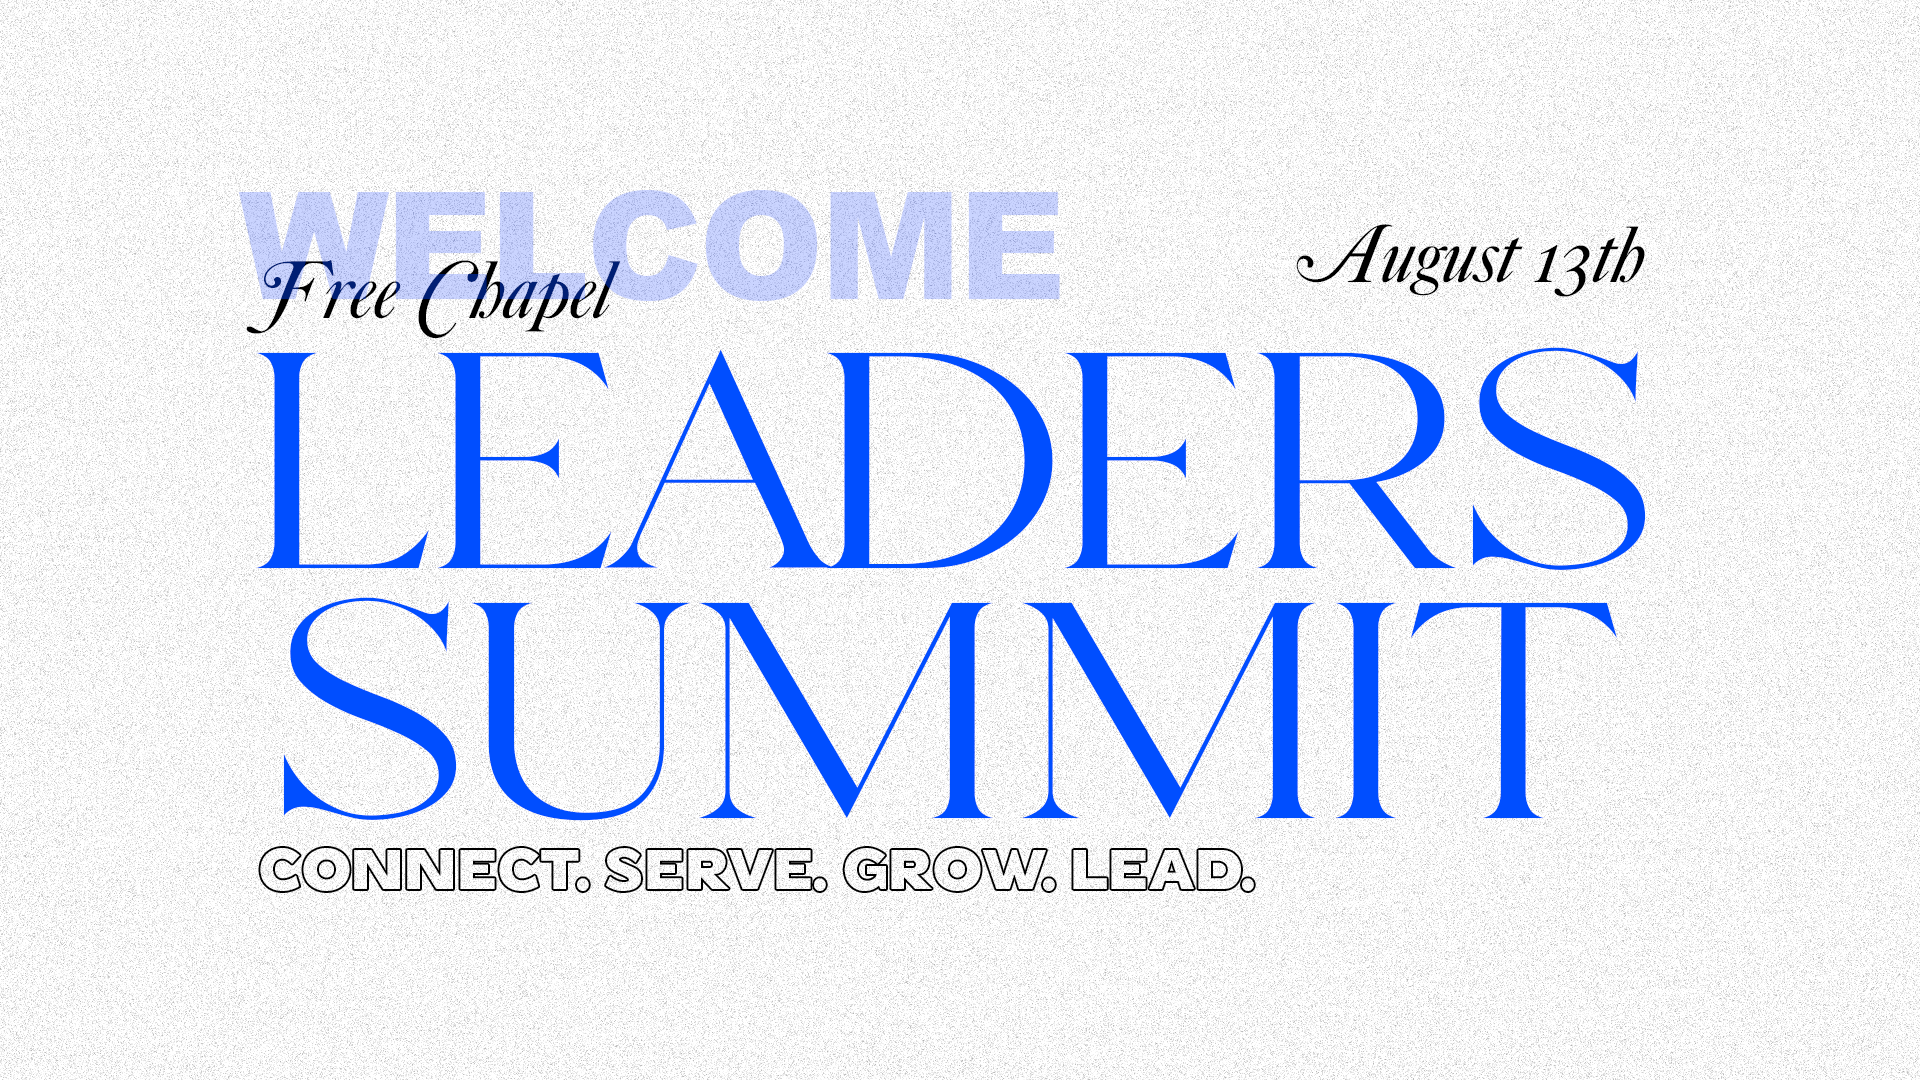 Leaders Summit at the Braselton campus